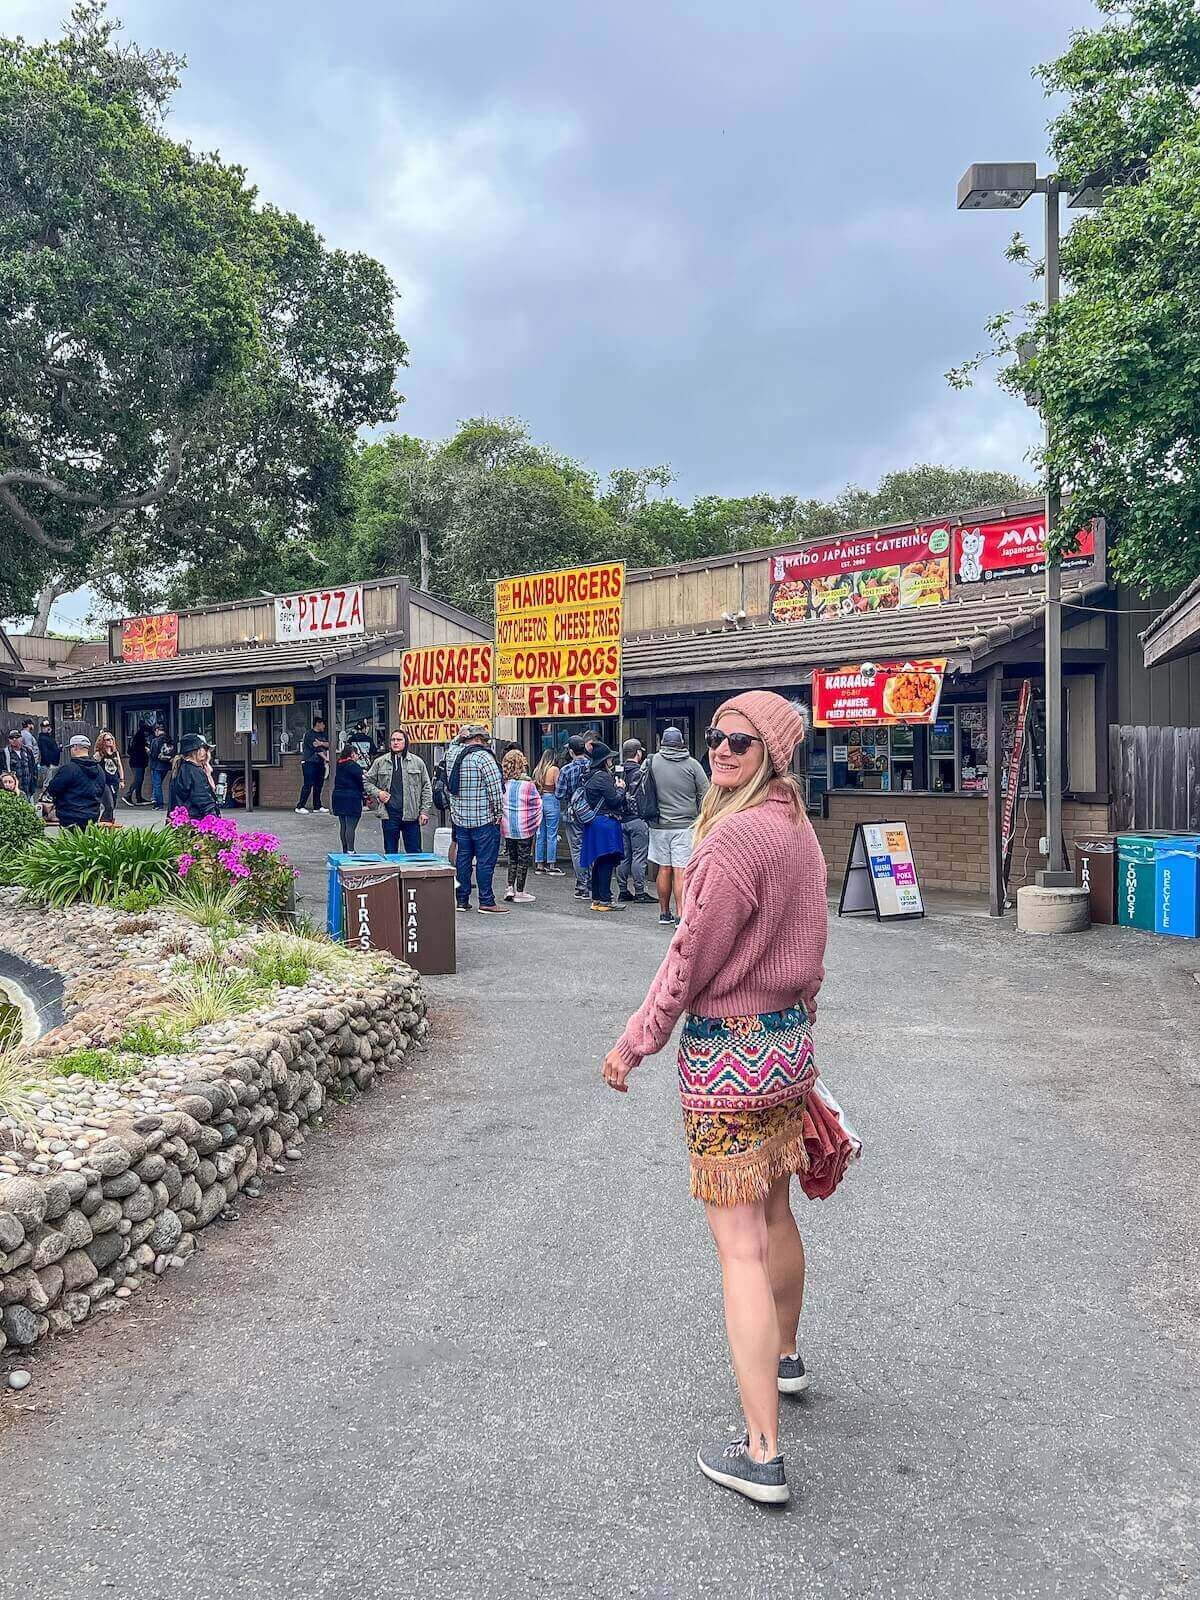 A young woman in a pink sweater and patterned miniskirt wears grey sneakers and smiles back over her shoulder while walking on a path towards some outdoor food stands.